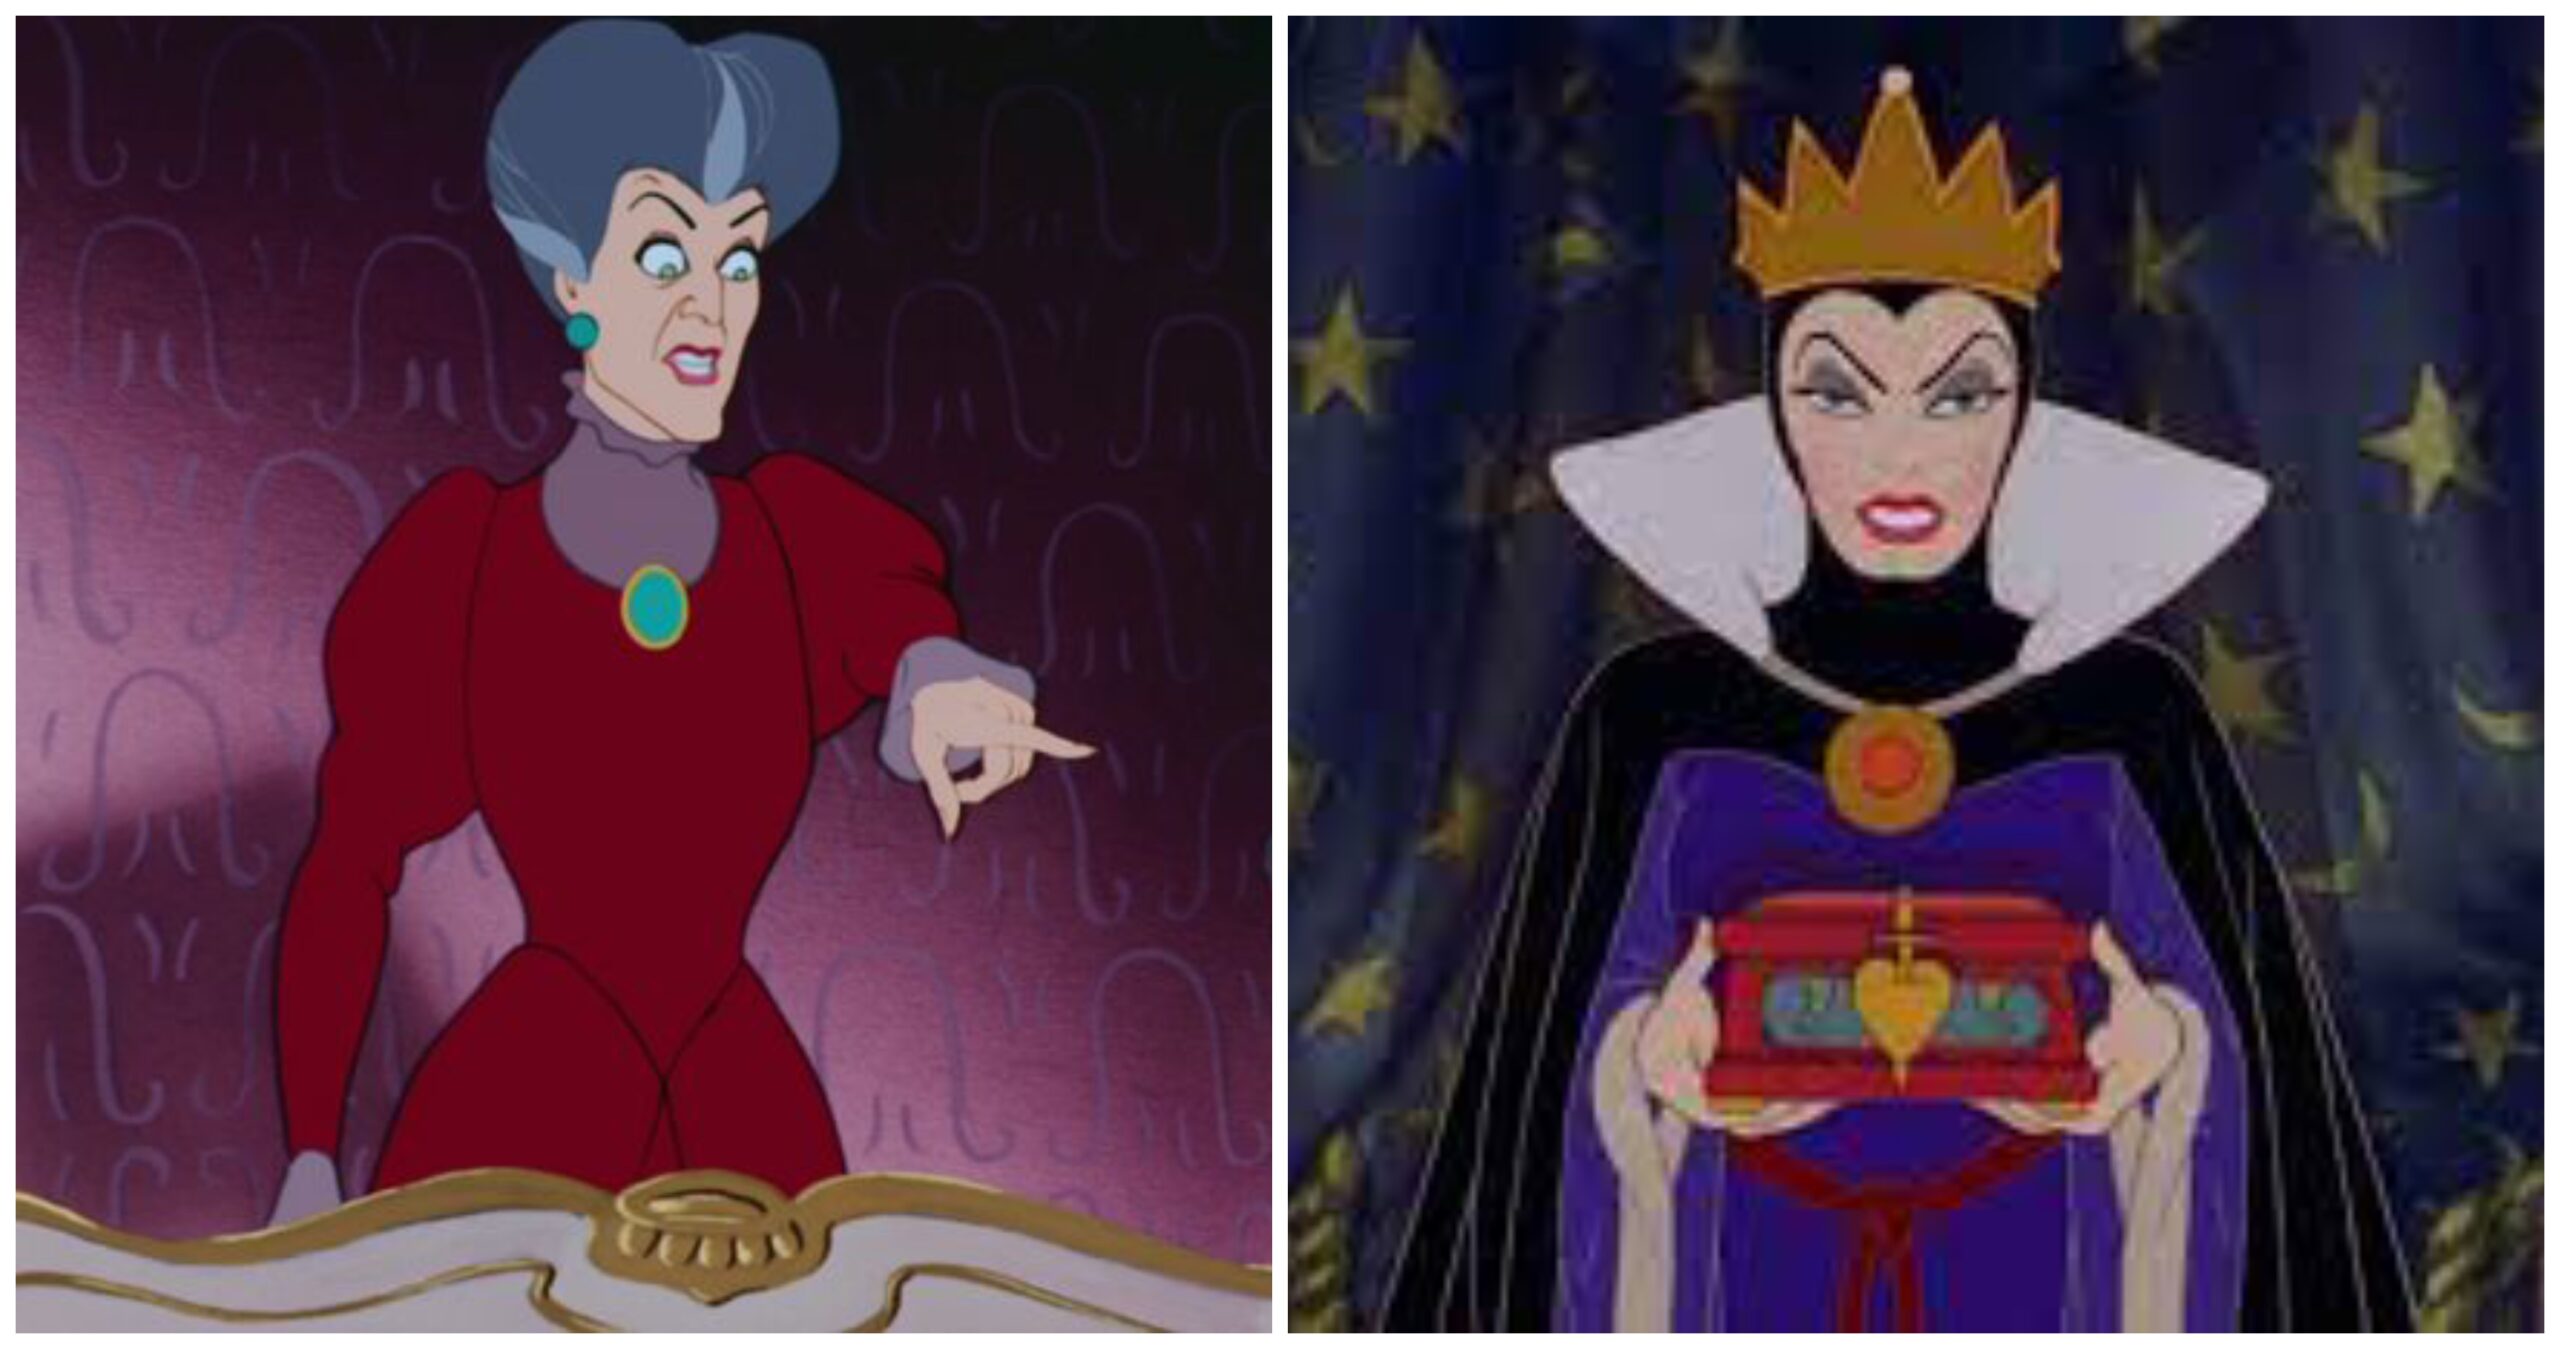 Lady Tremaine from Cinderella and the Wicked Stepmother from Snow White and the Seven Dwarfs